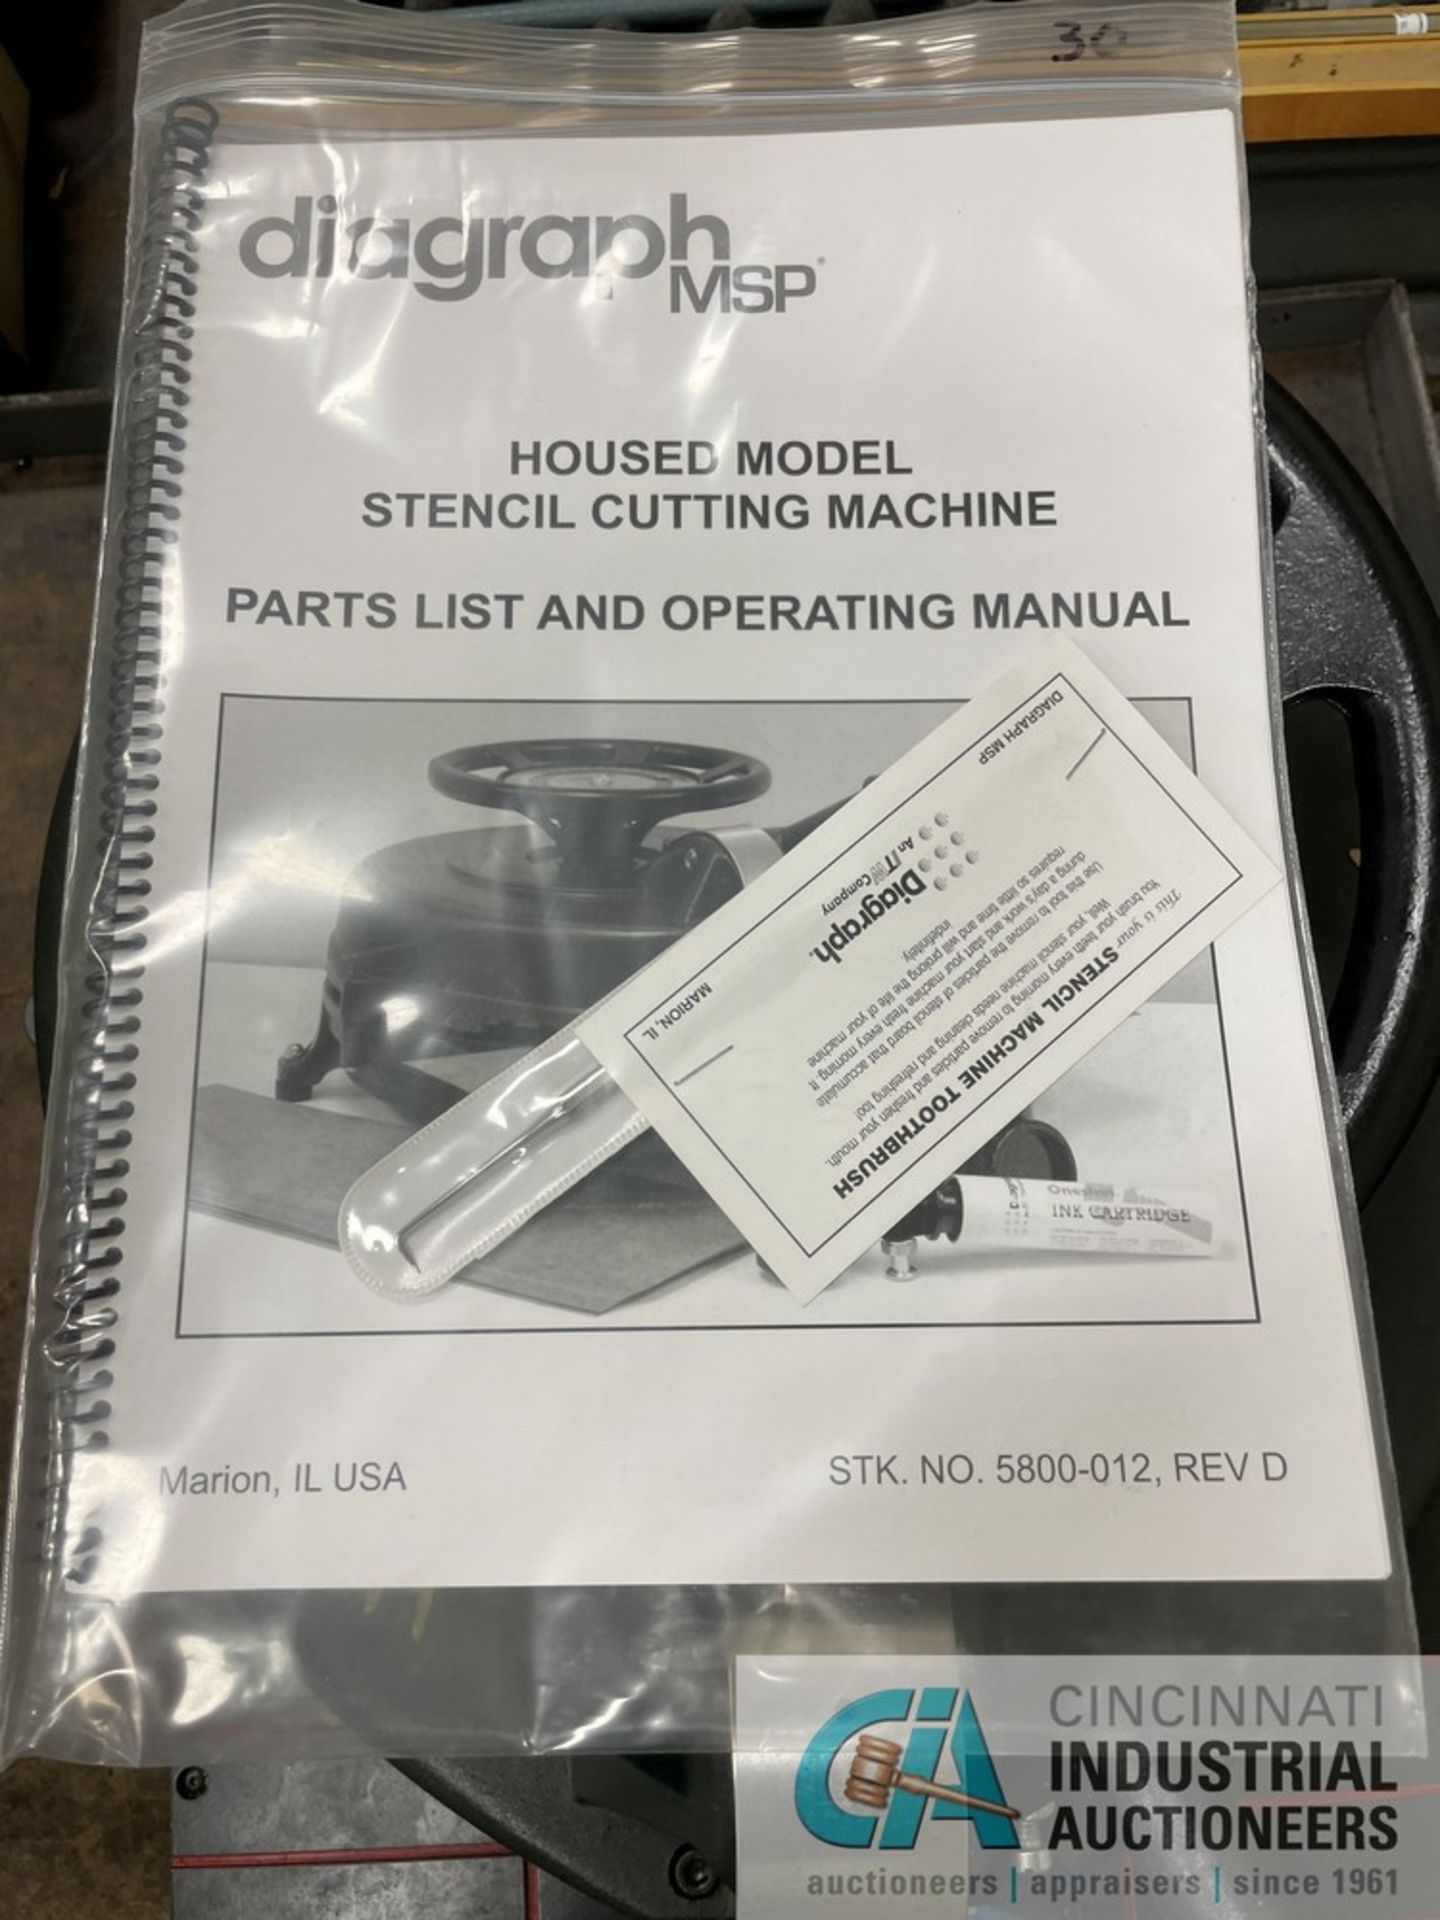 DIAGRAPH MSP HOUSED MODEL STENCIL CUTTING MACHINE (NEW) - Image 2 of 3